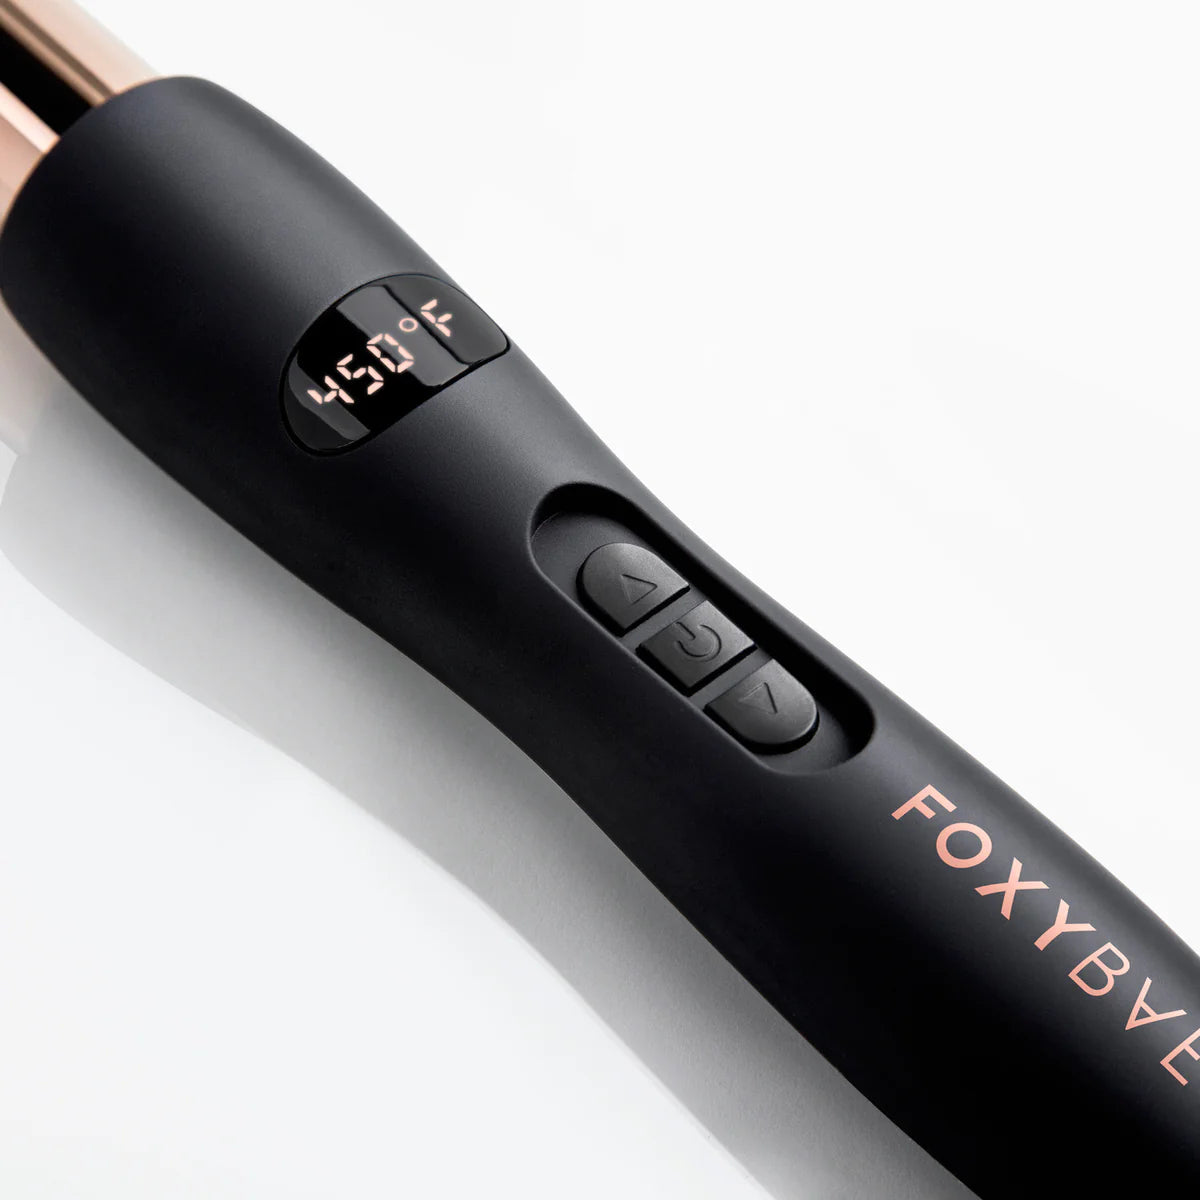 FoxyBae 25mm Rose Gold Curling Wand- 1inch